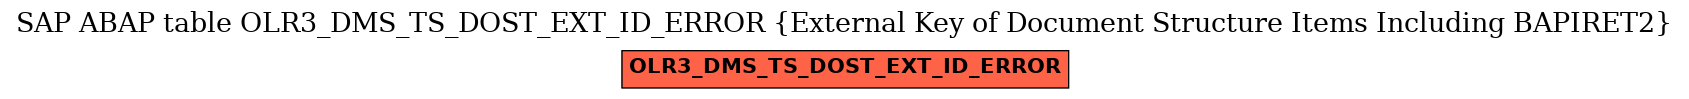 E-R Diagram for table OLR3_DMS_TS_DOST_EXT_ID_ERROR (External Key of Document Structure Items Including BAPIRET2)